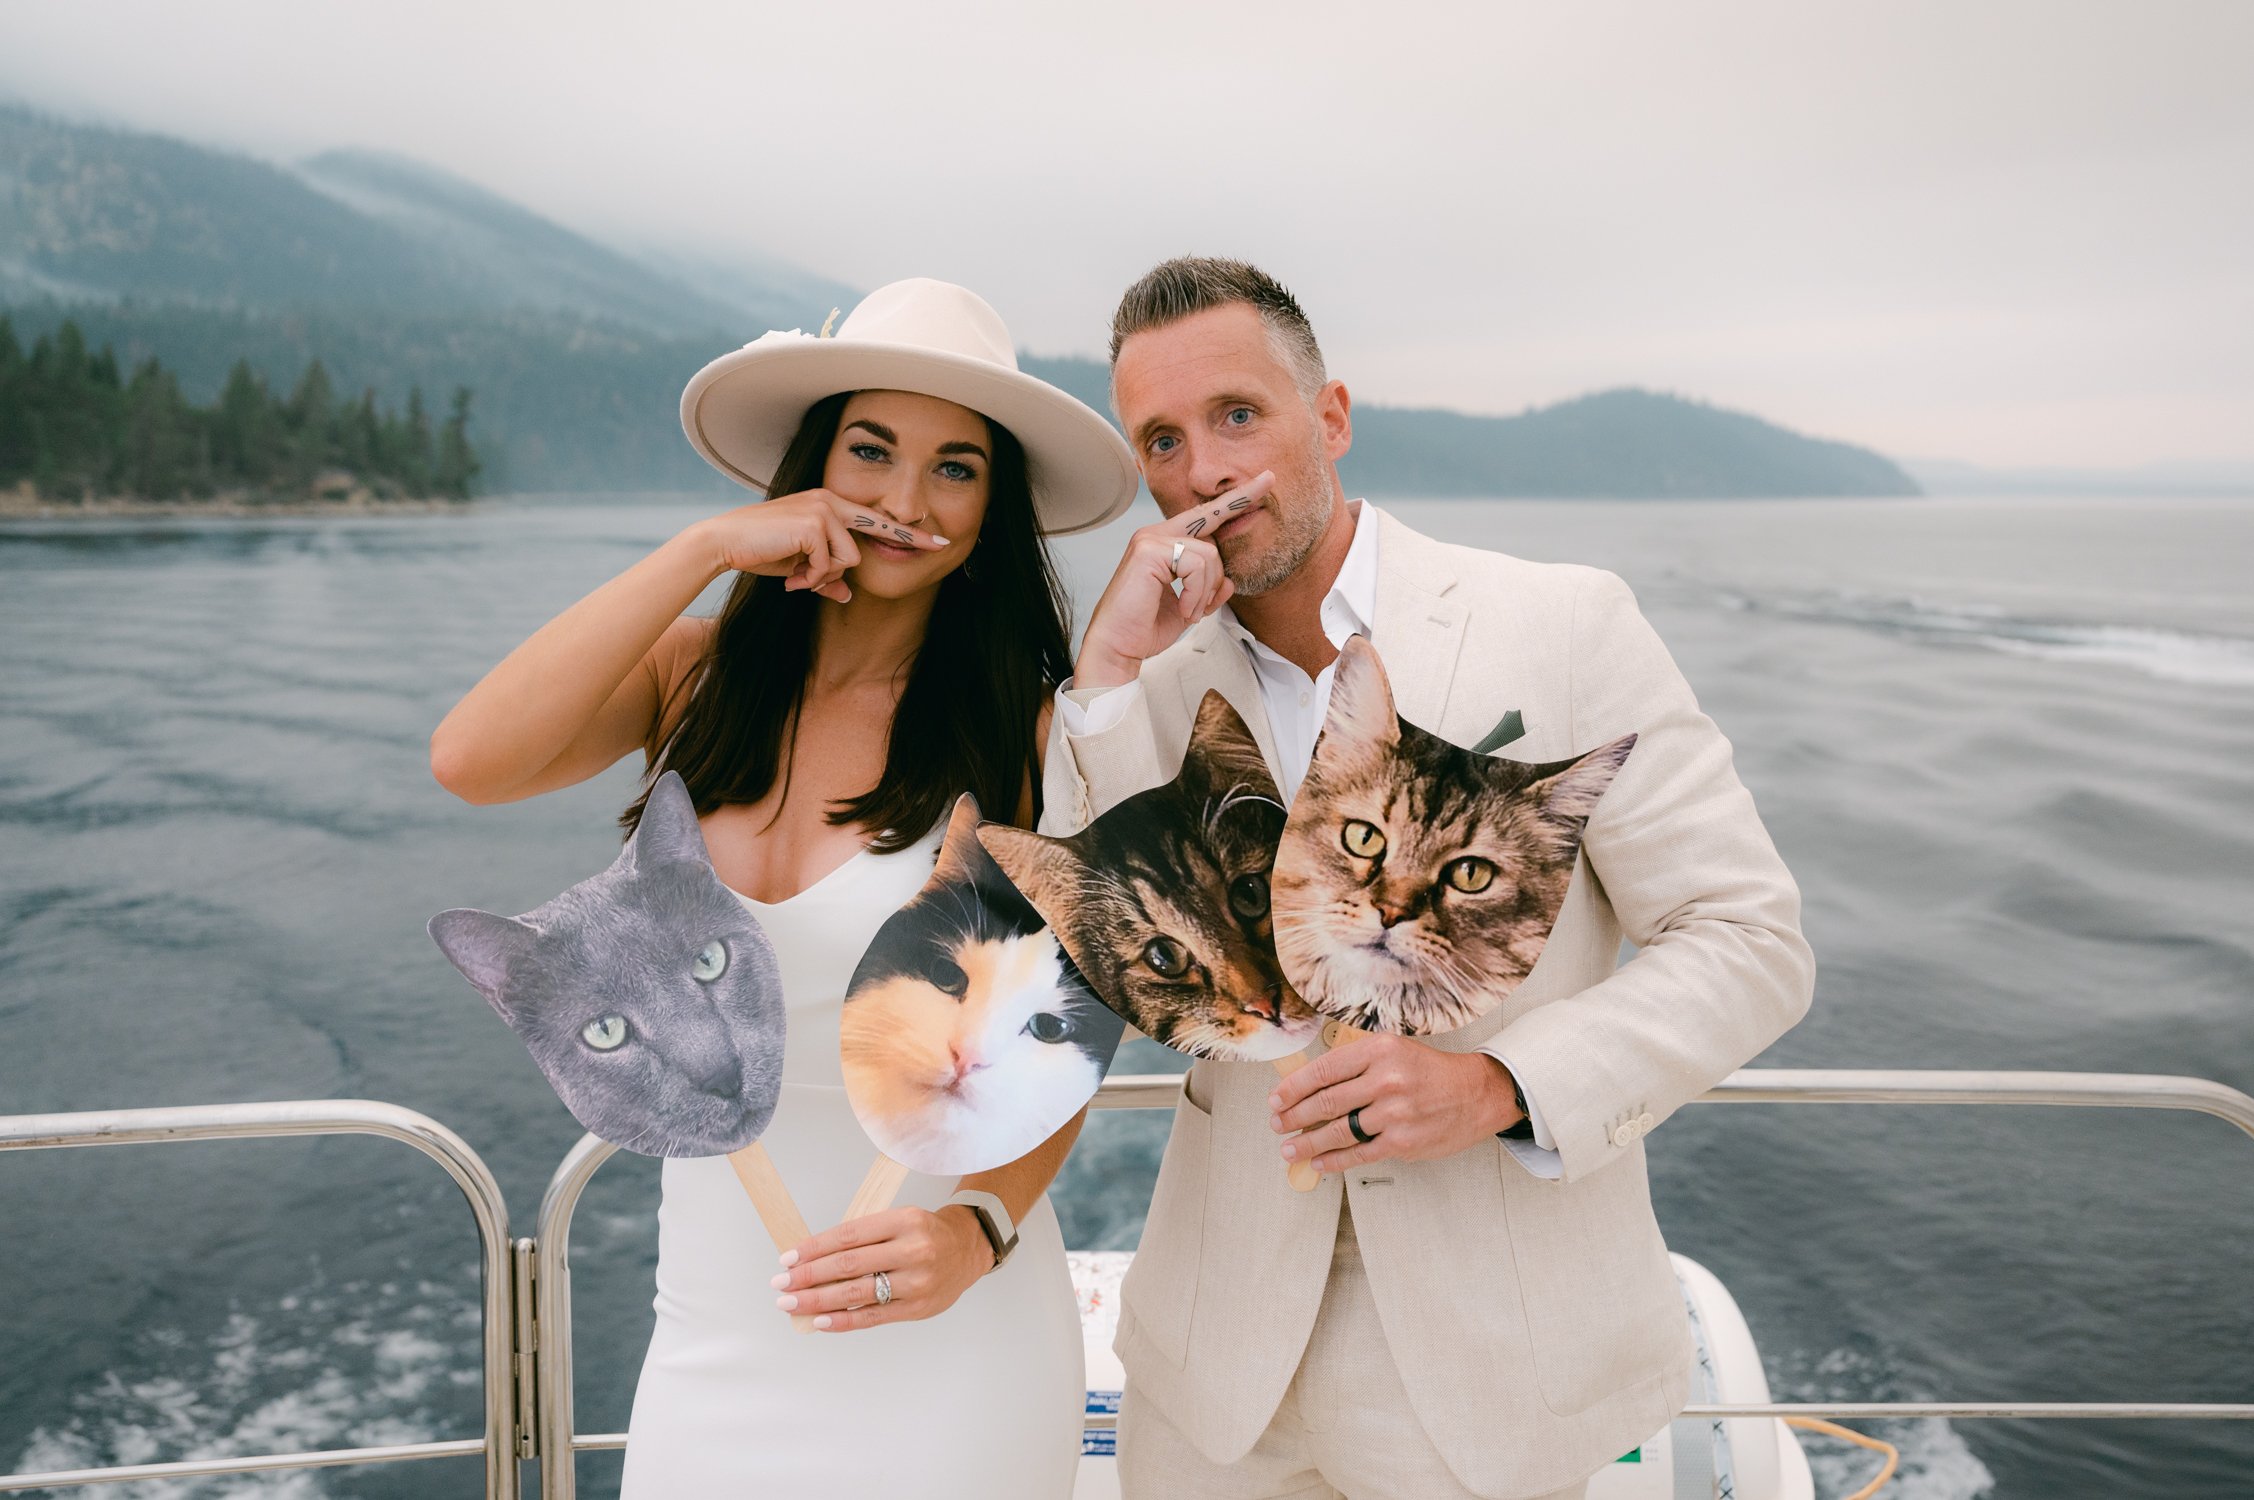 Lake Tahoe Yacht wedding, photo of couple on the boat with cat cut-outs